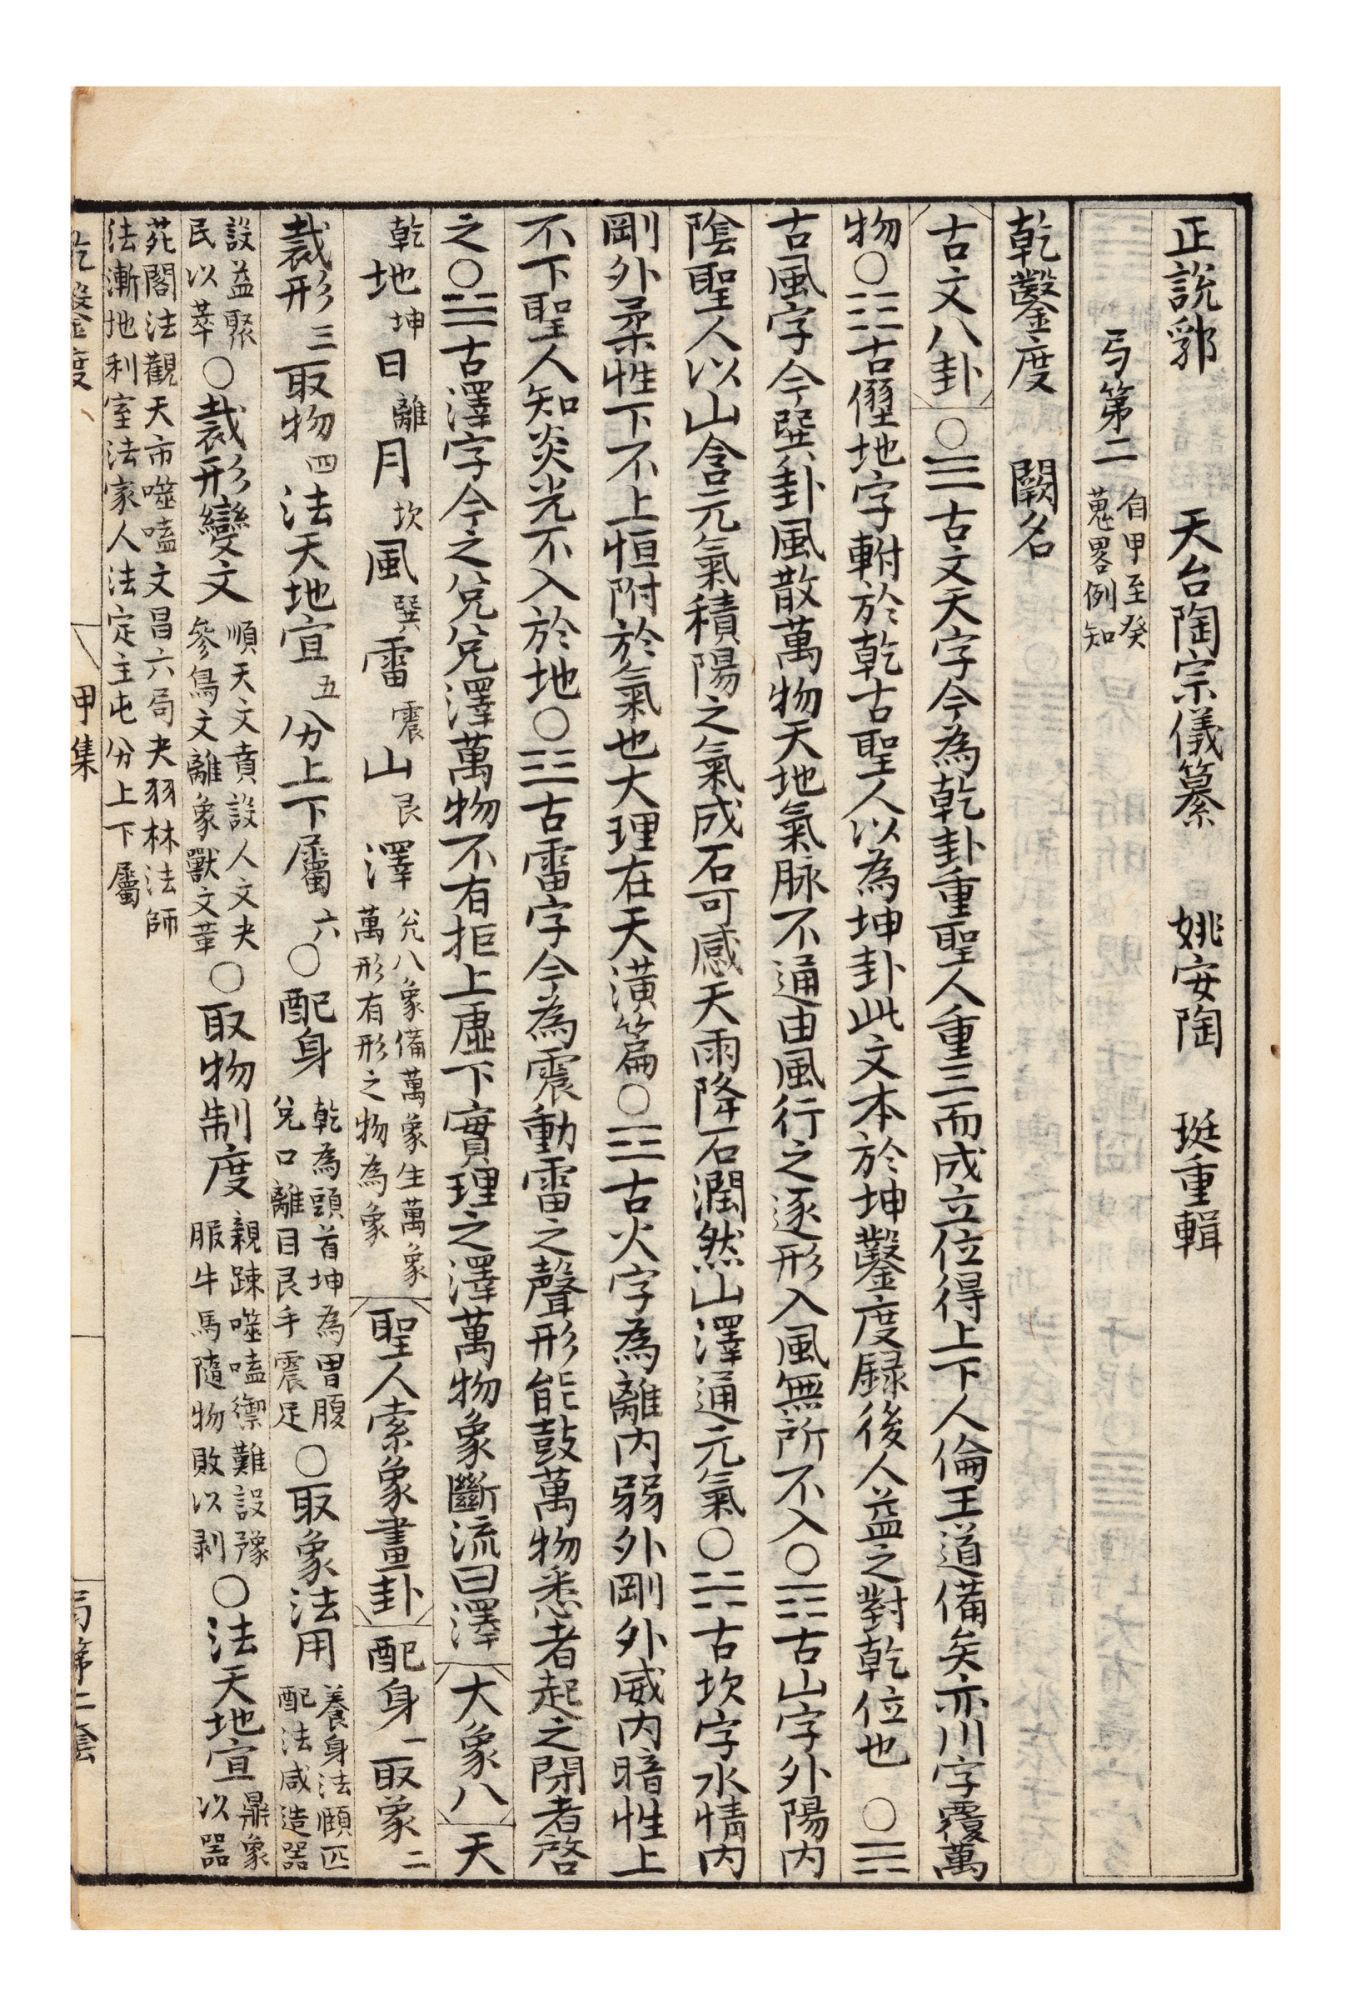 Finely written manuscript on paper of Shuo fu lüe 說郛畧 Outline of Shuo fu by  Zongyi 陶宗儀 TAO on JONATHAN A. HILL, BOOKSELLER, INC